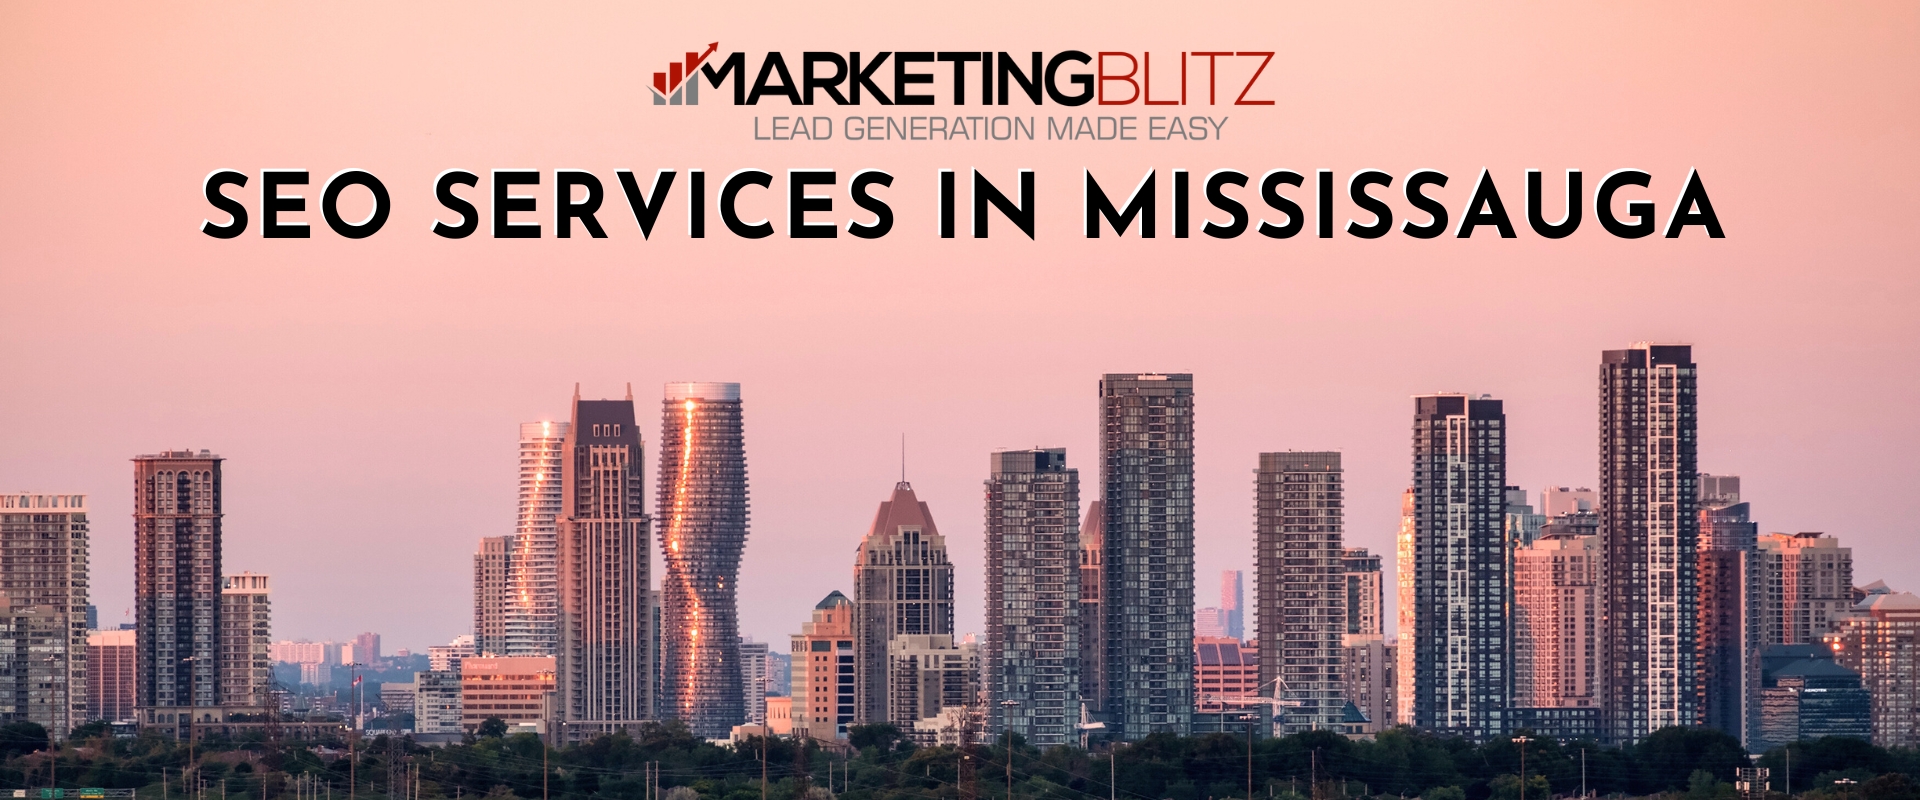 SEO Services in Mississauga (Landscape)